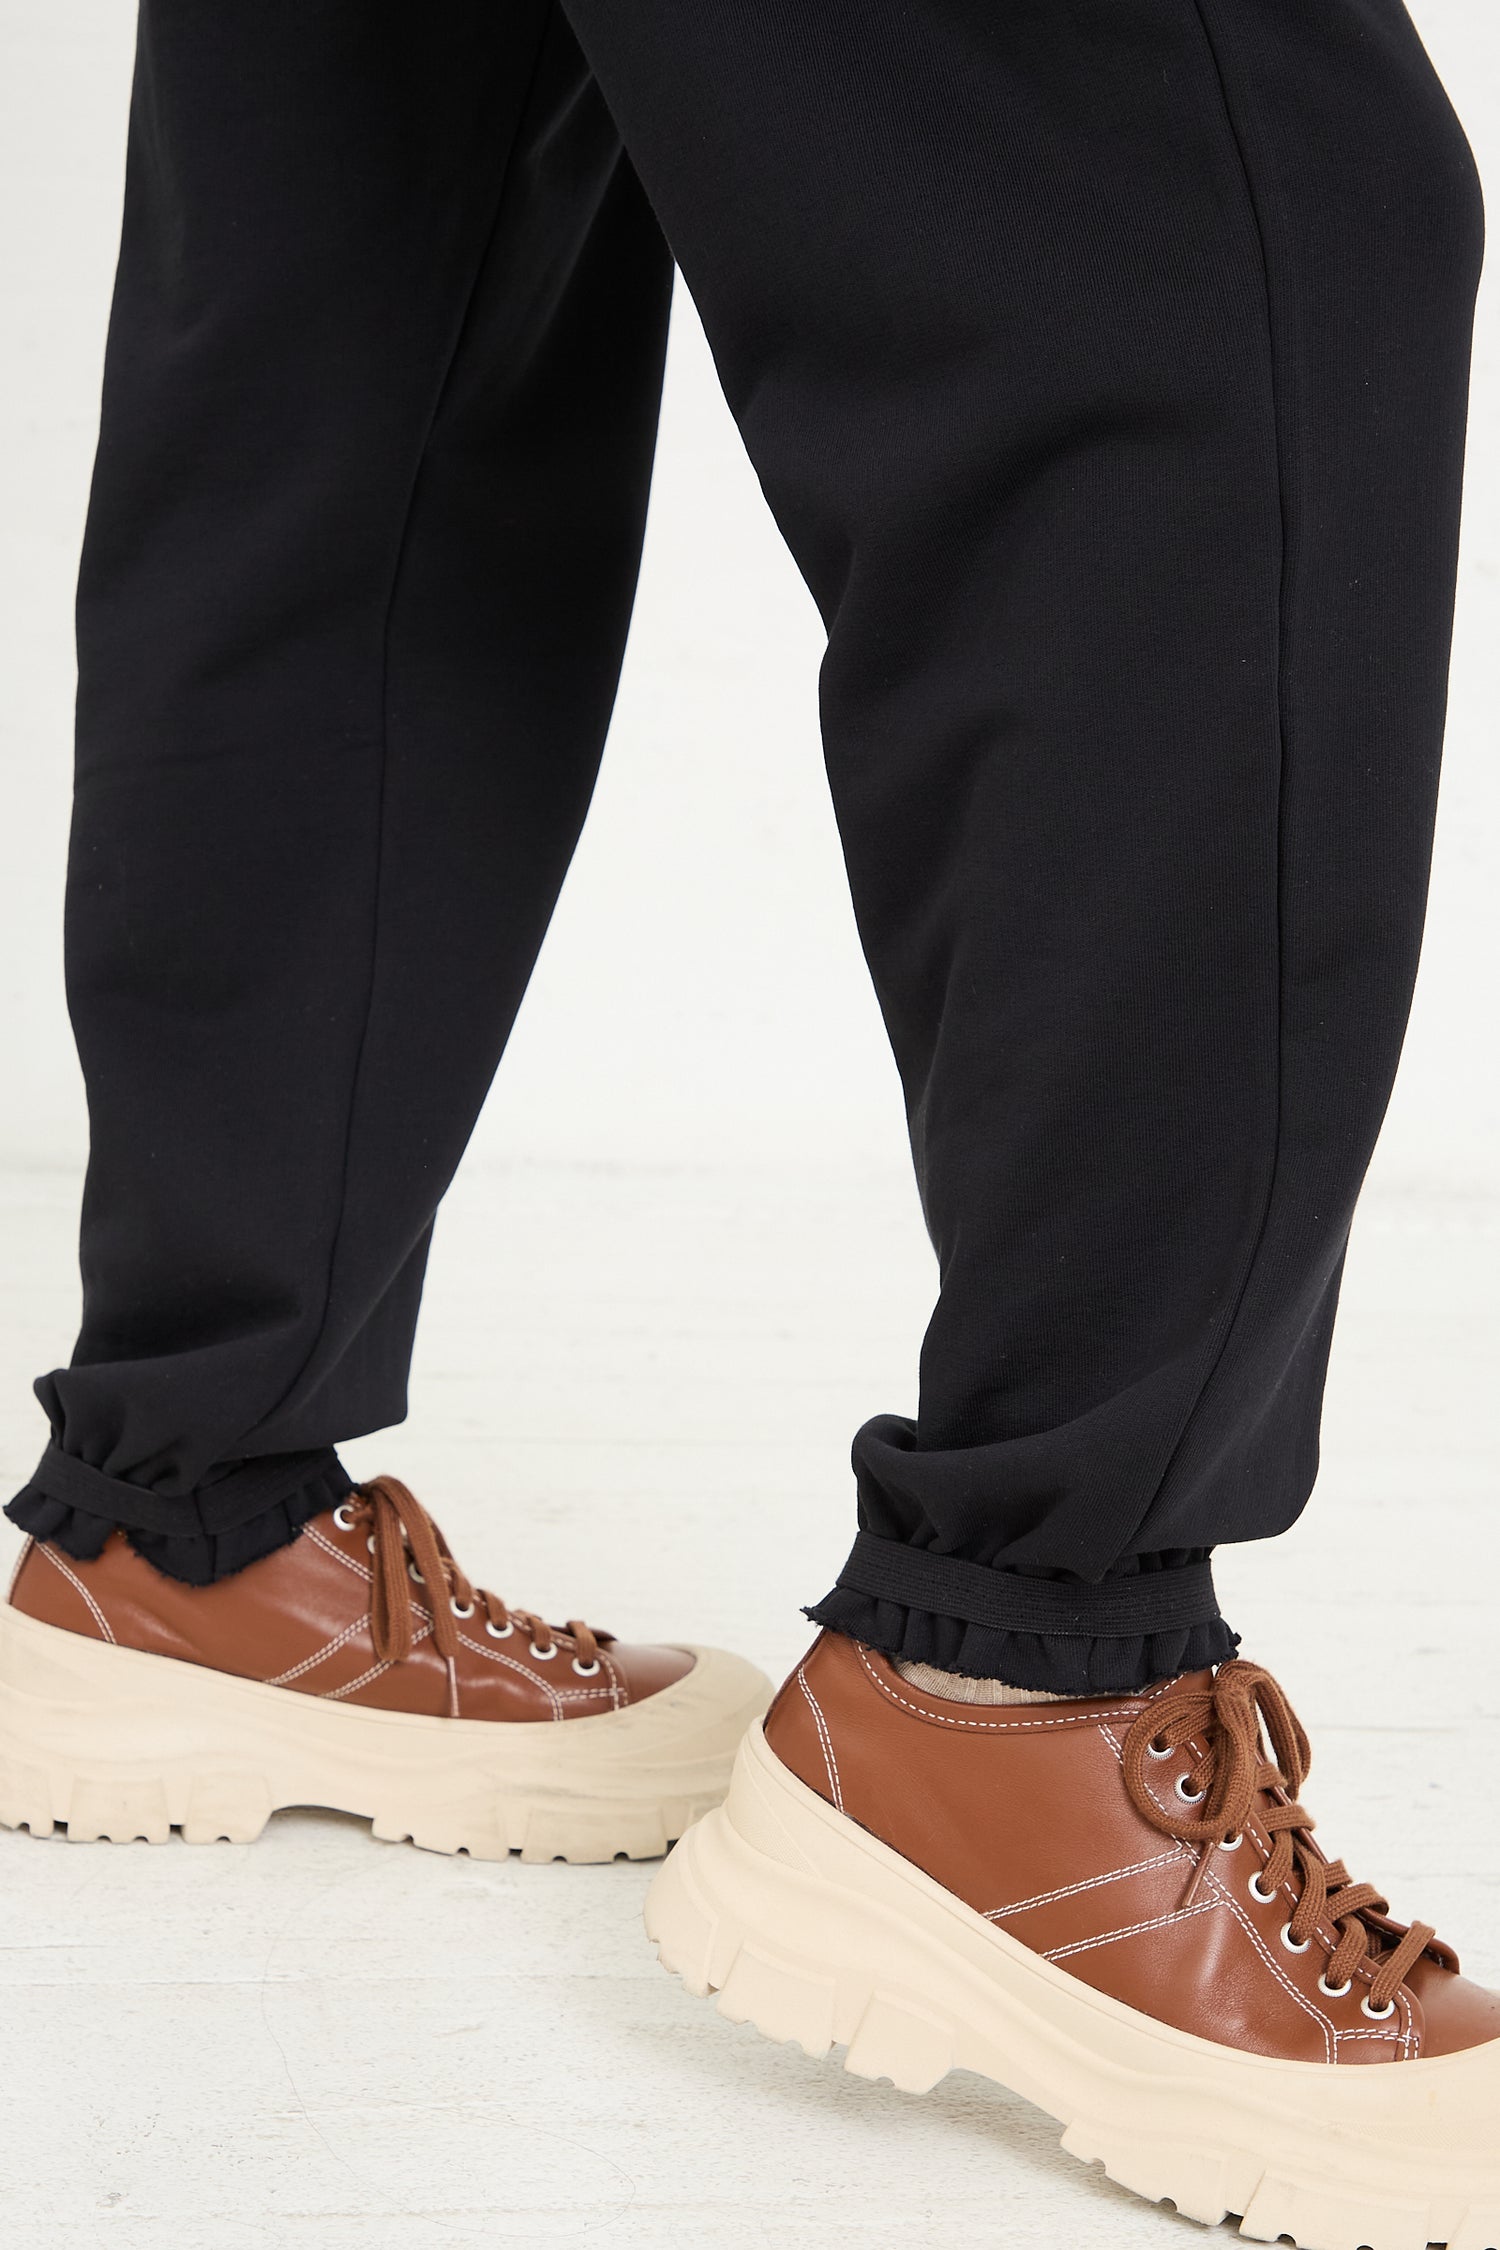 A person standing in Baserange Italian Fleece Route Sweatpants in Black paired with brown lace-up shoes with thick soles.